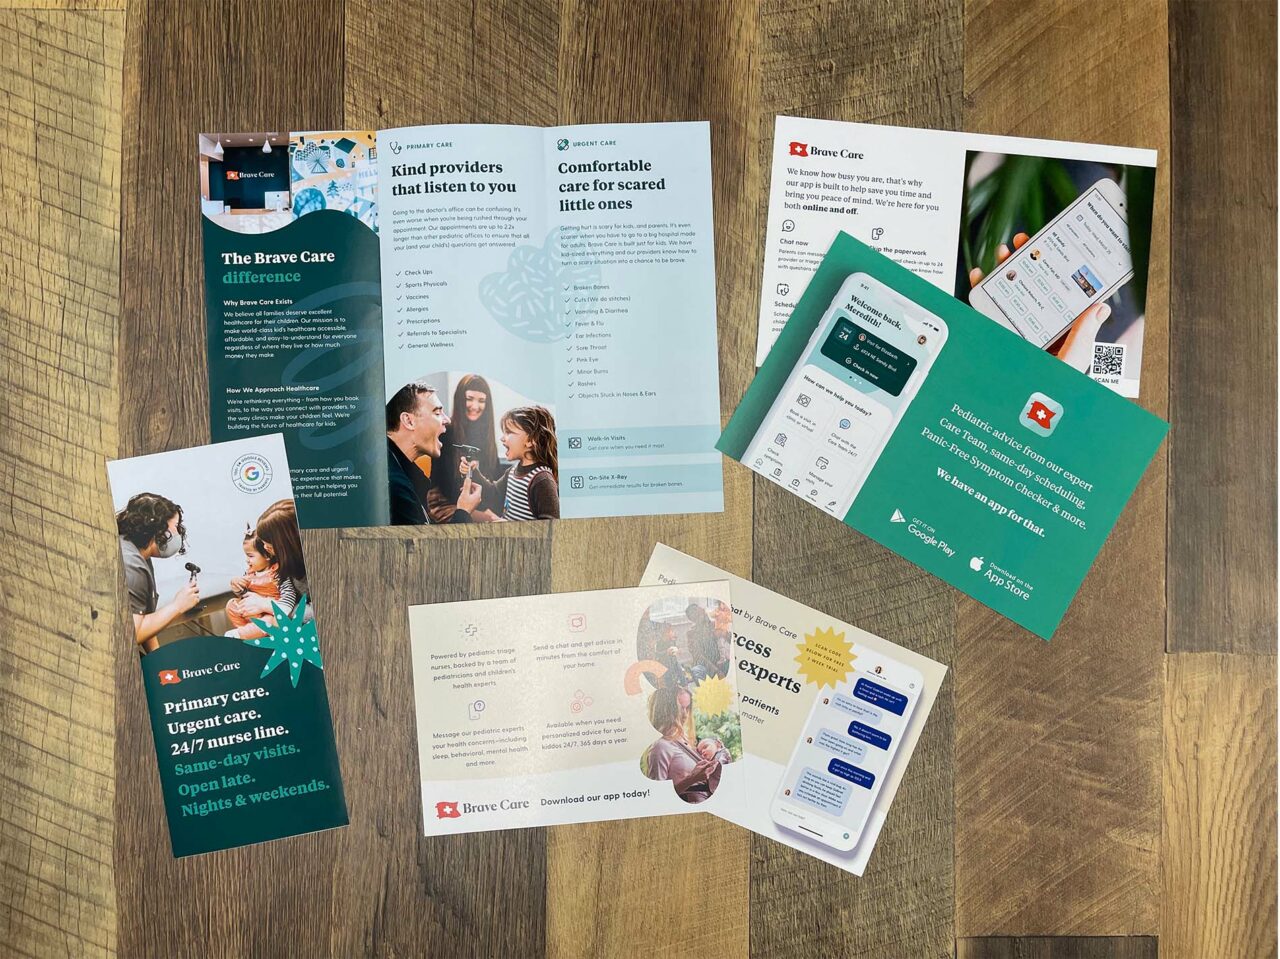 Example of Morel's printing capabilities, showing multiple printed patient materials for Brave Care